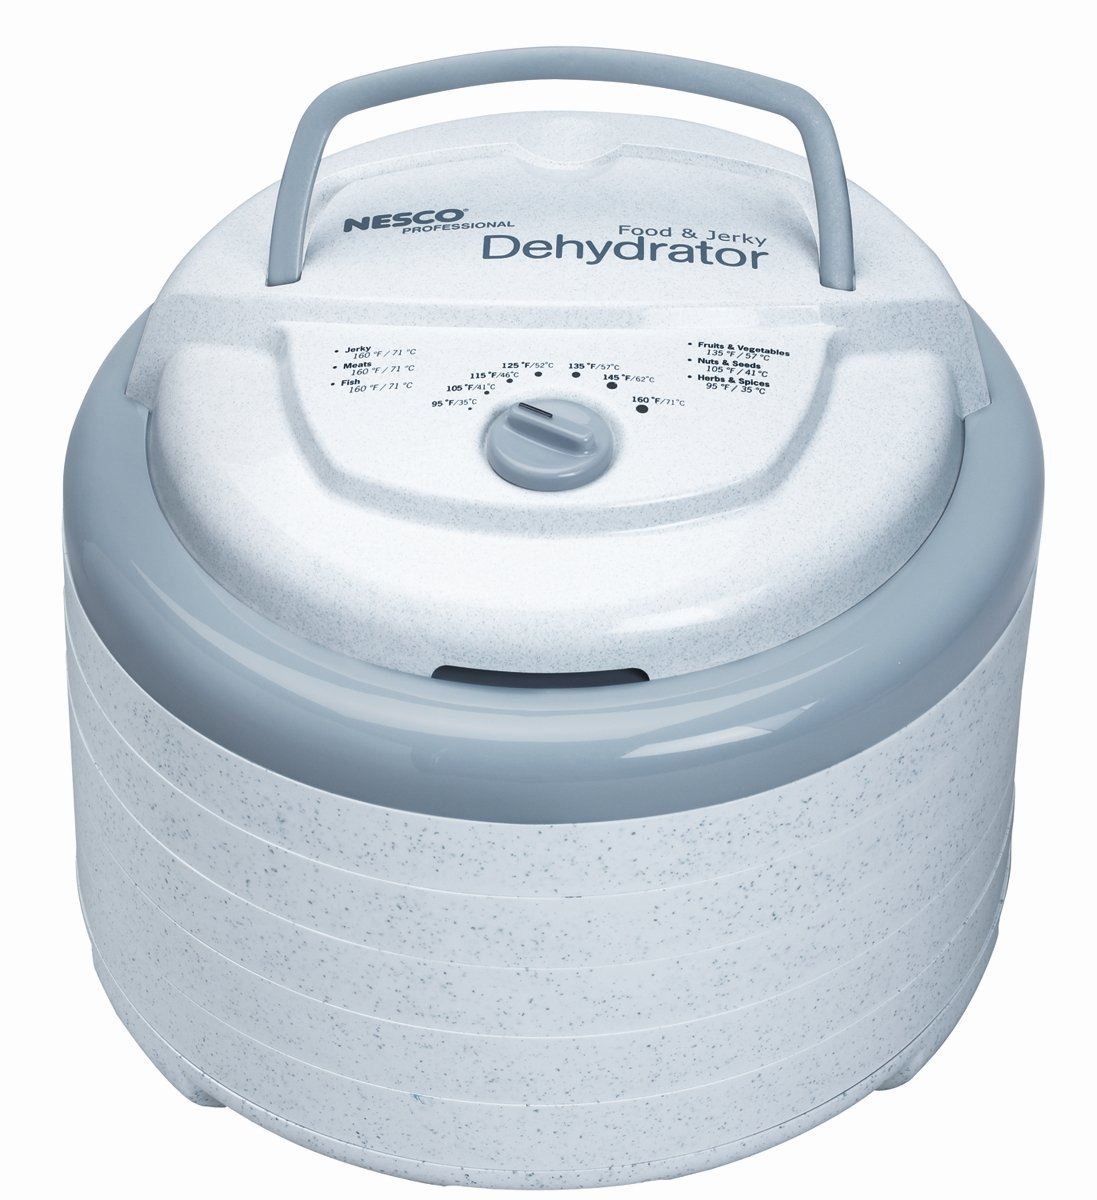 Nesco Snackmaster Pro Food Dehydrator FD-75A Review